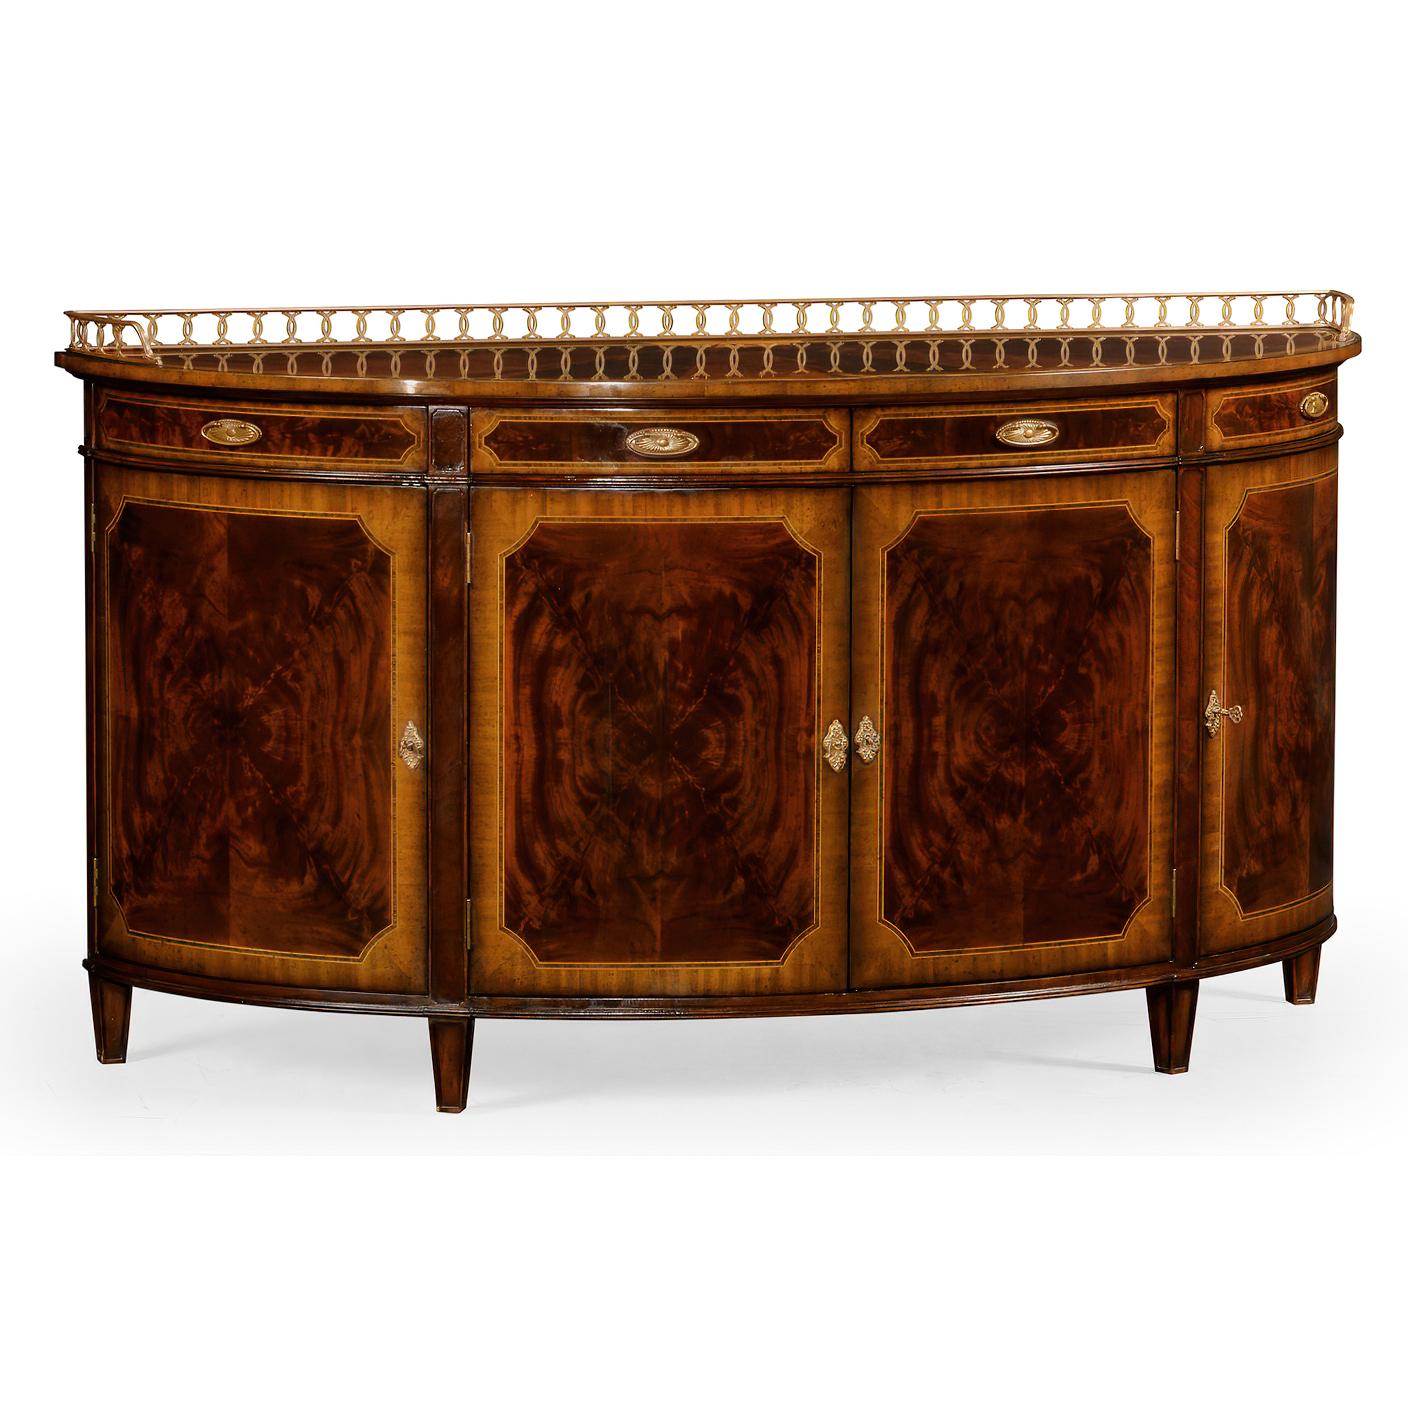 Substantial George III style demilune sideboard or buffet with four doors, adjustable shelves within, and a frieze of four drawers. Fine crotch mahogany veneers and crossbanding both on the outside and inside the curved doors. Pierced patinated